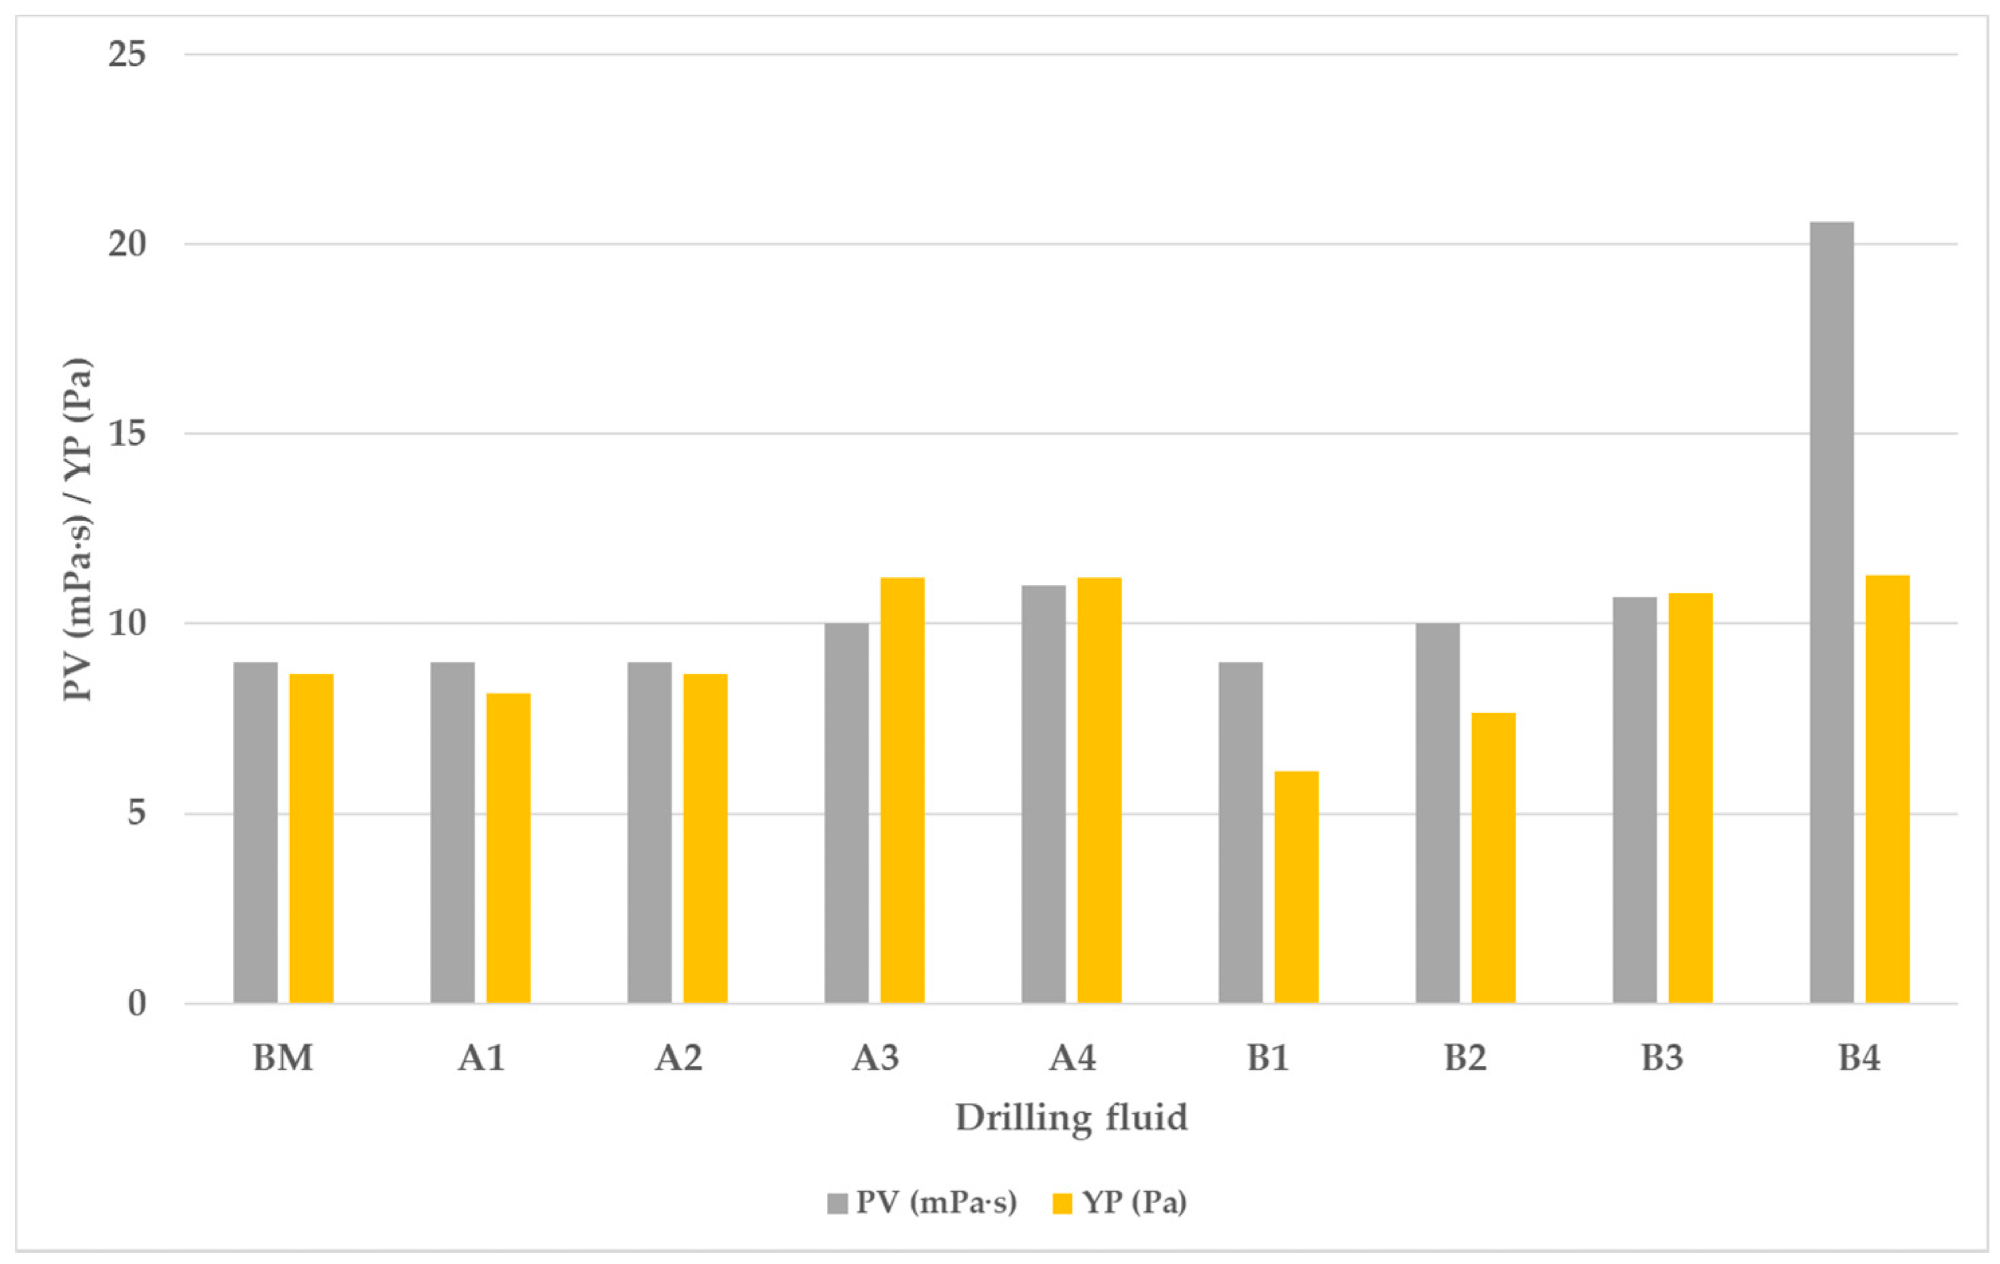 Plastic viscosity (PV) and yield point (YP) of all tested drilling fluids.